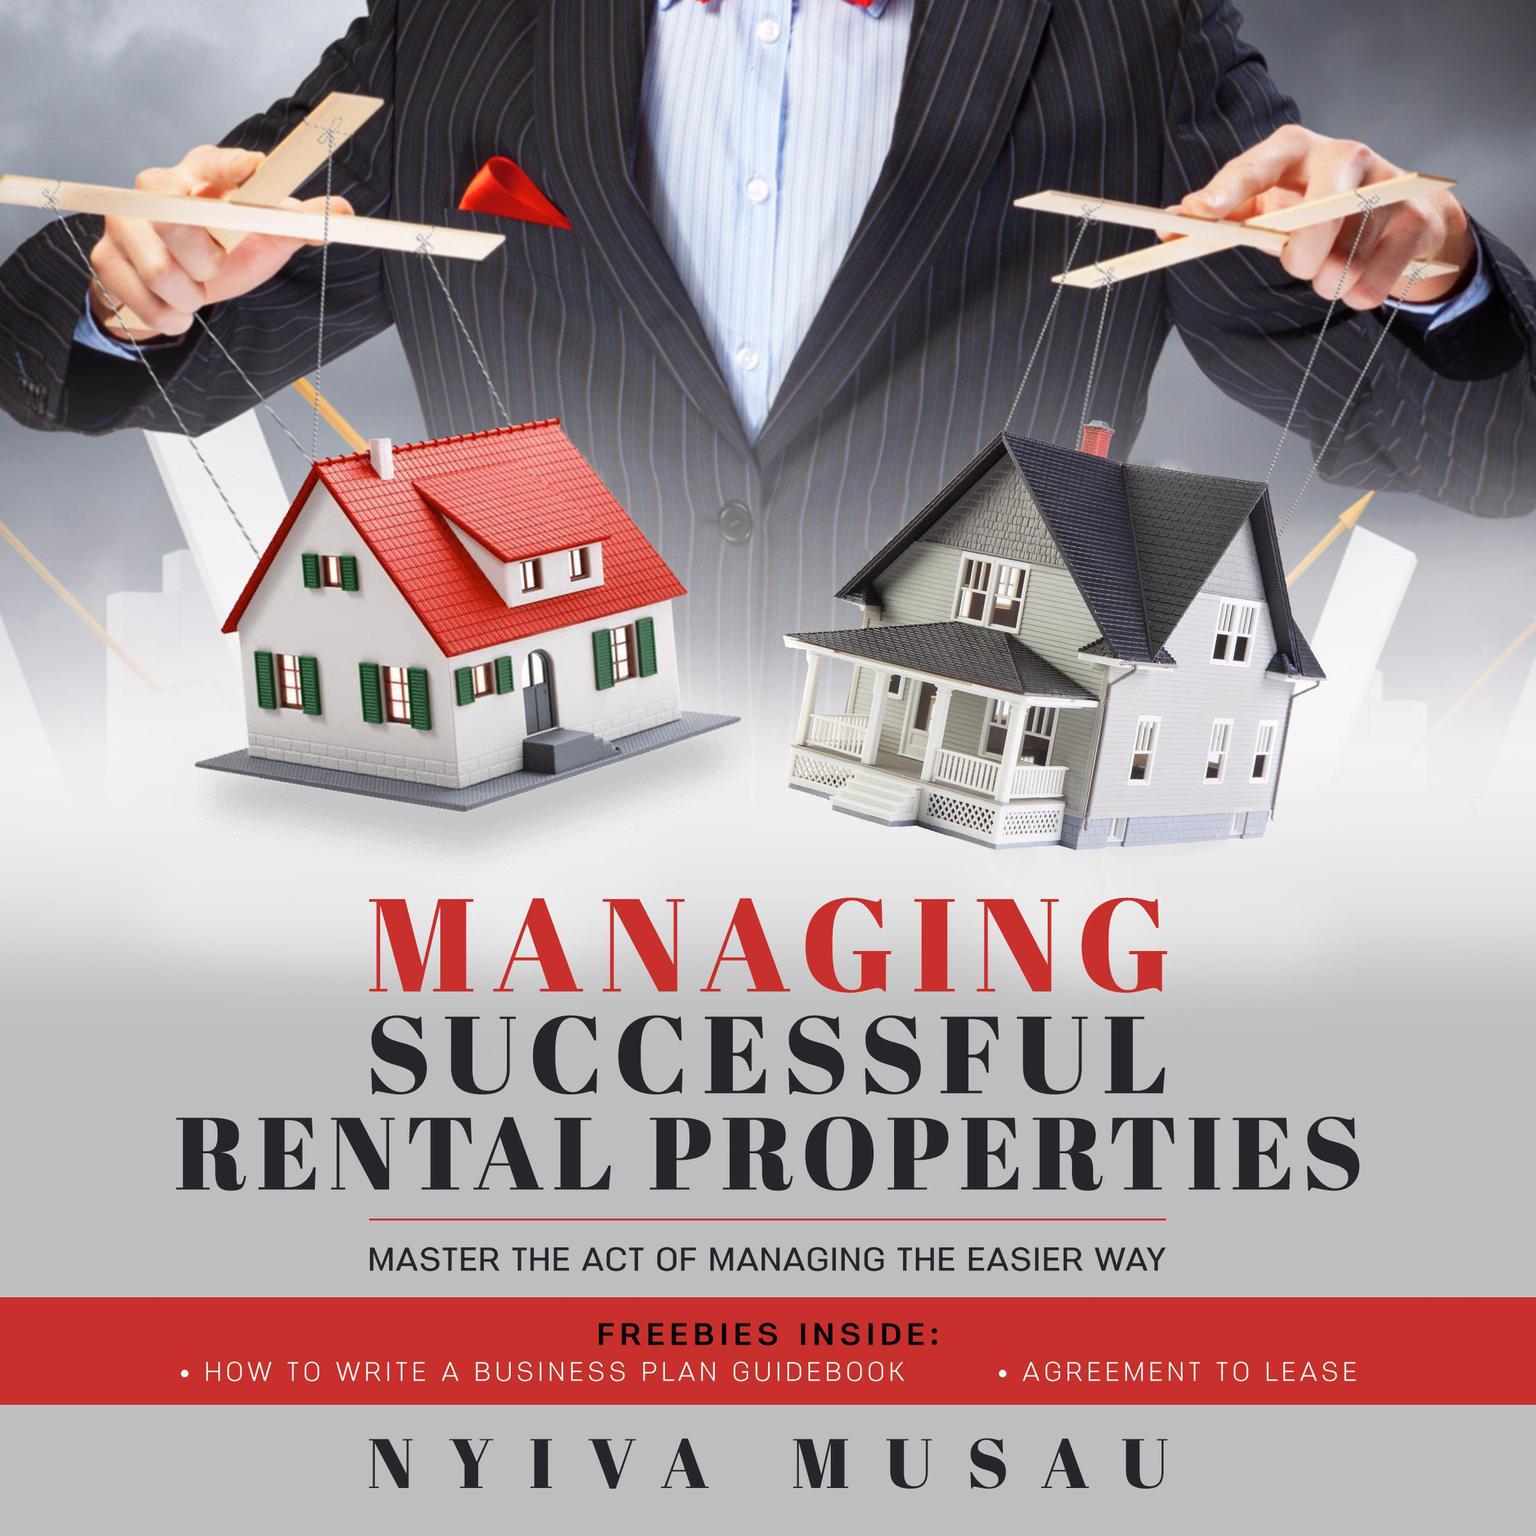 Managing Successful Rental Pproperties (Abridged): Master the Act of Managing the Easier Way Audiobook, by Nyiva Musau